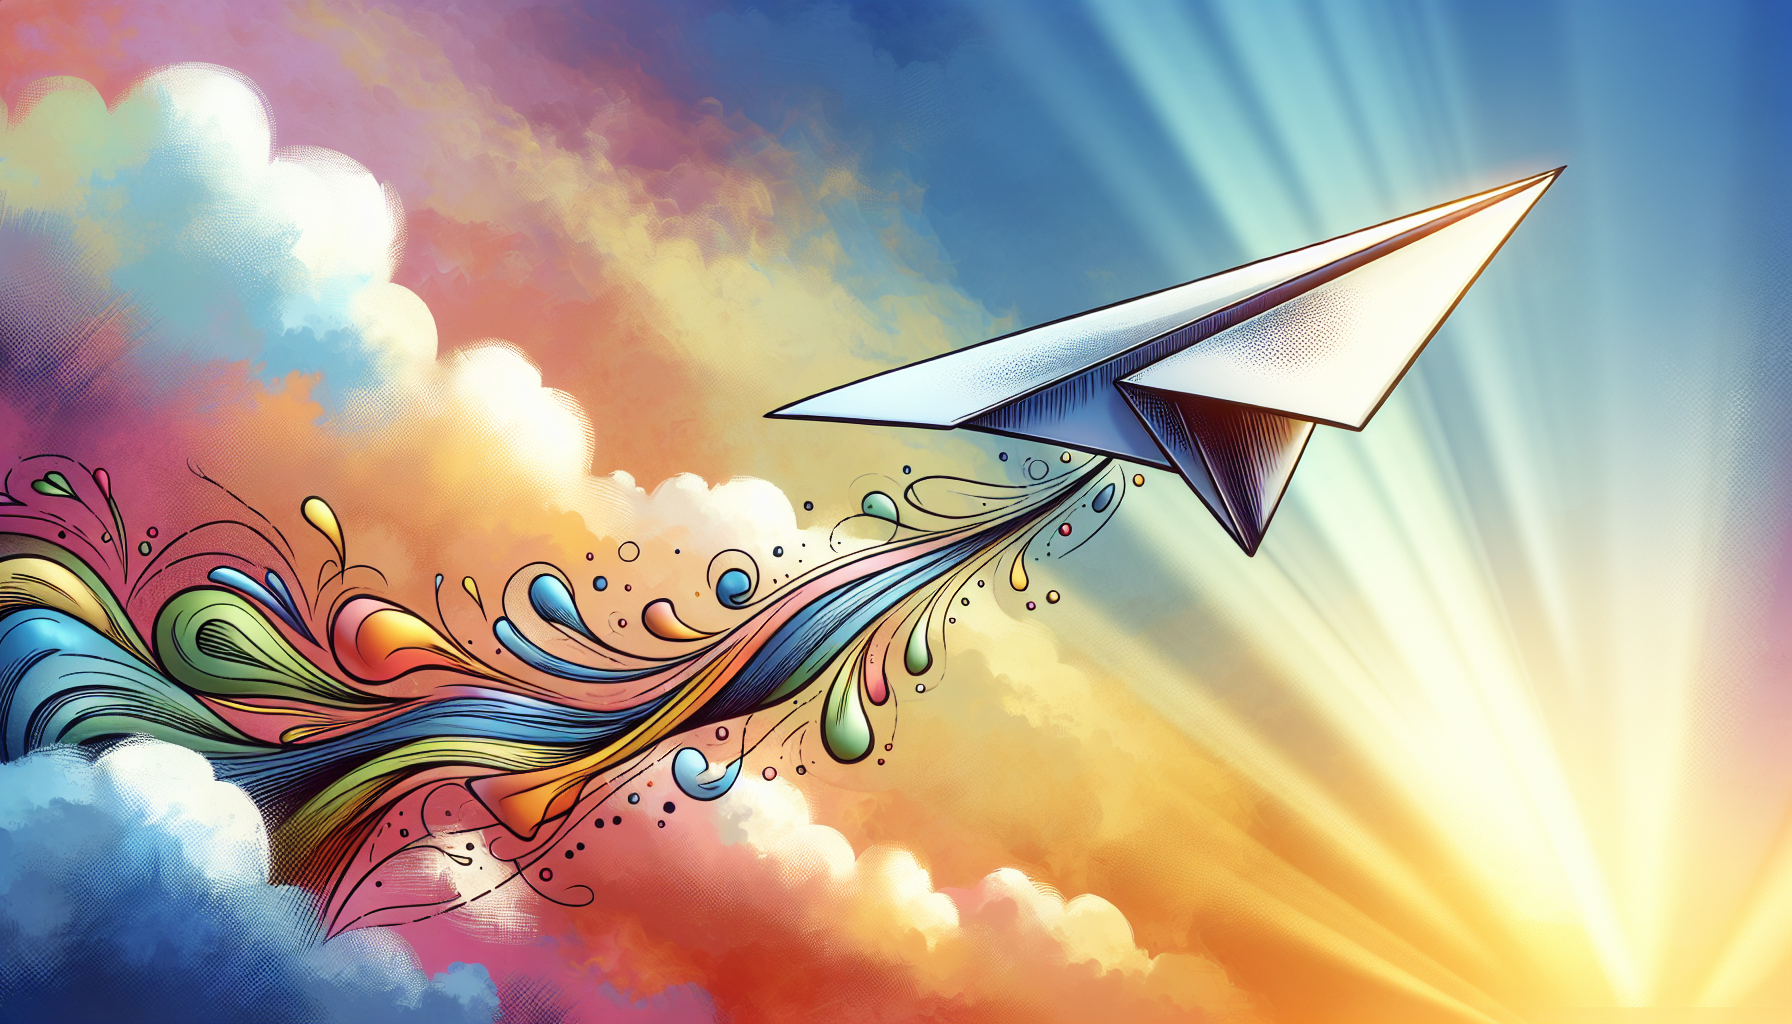 A creative illustration of a paper airplane with vibrant colors and dynamic motion